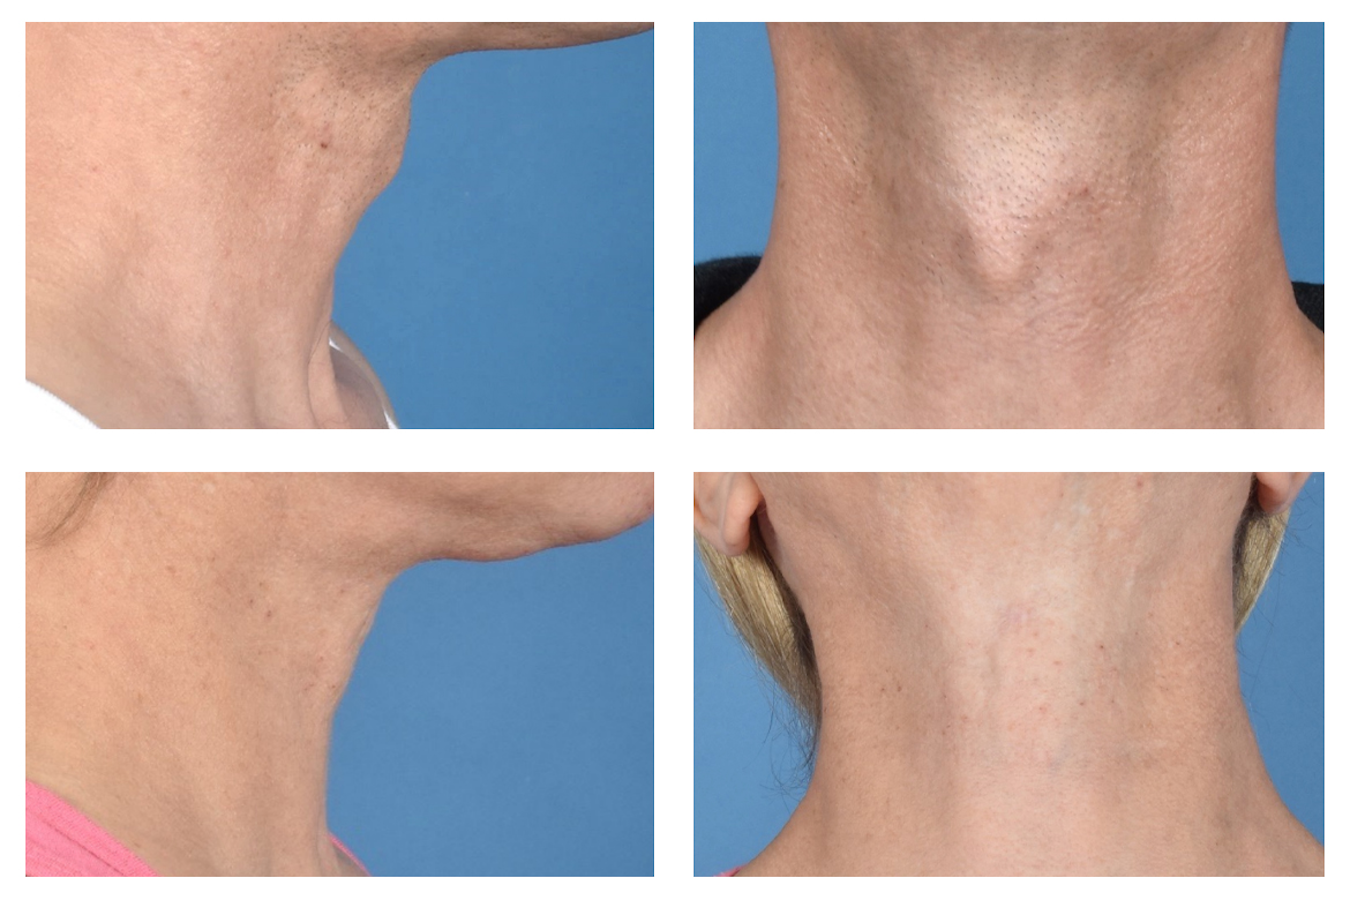 Collage showing four before-and-after photos of Adam's Apple reduction surgery